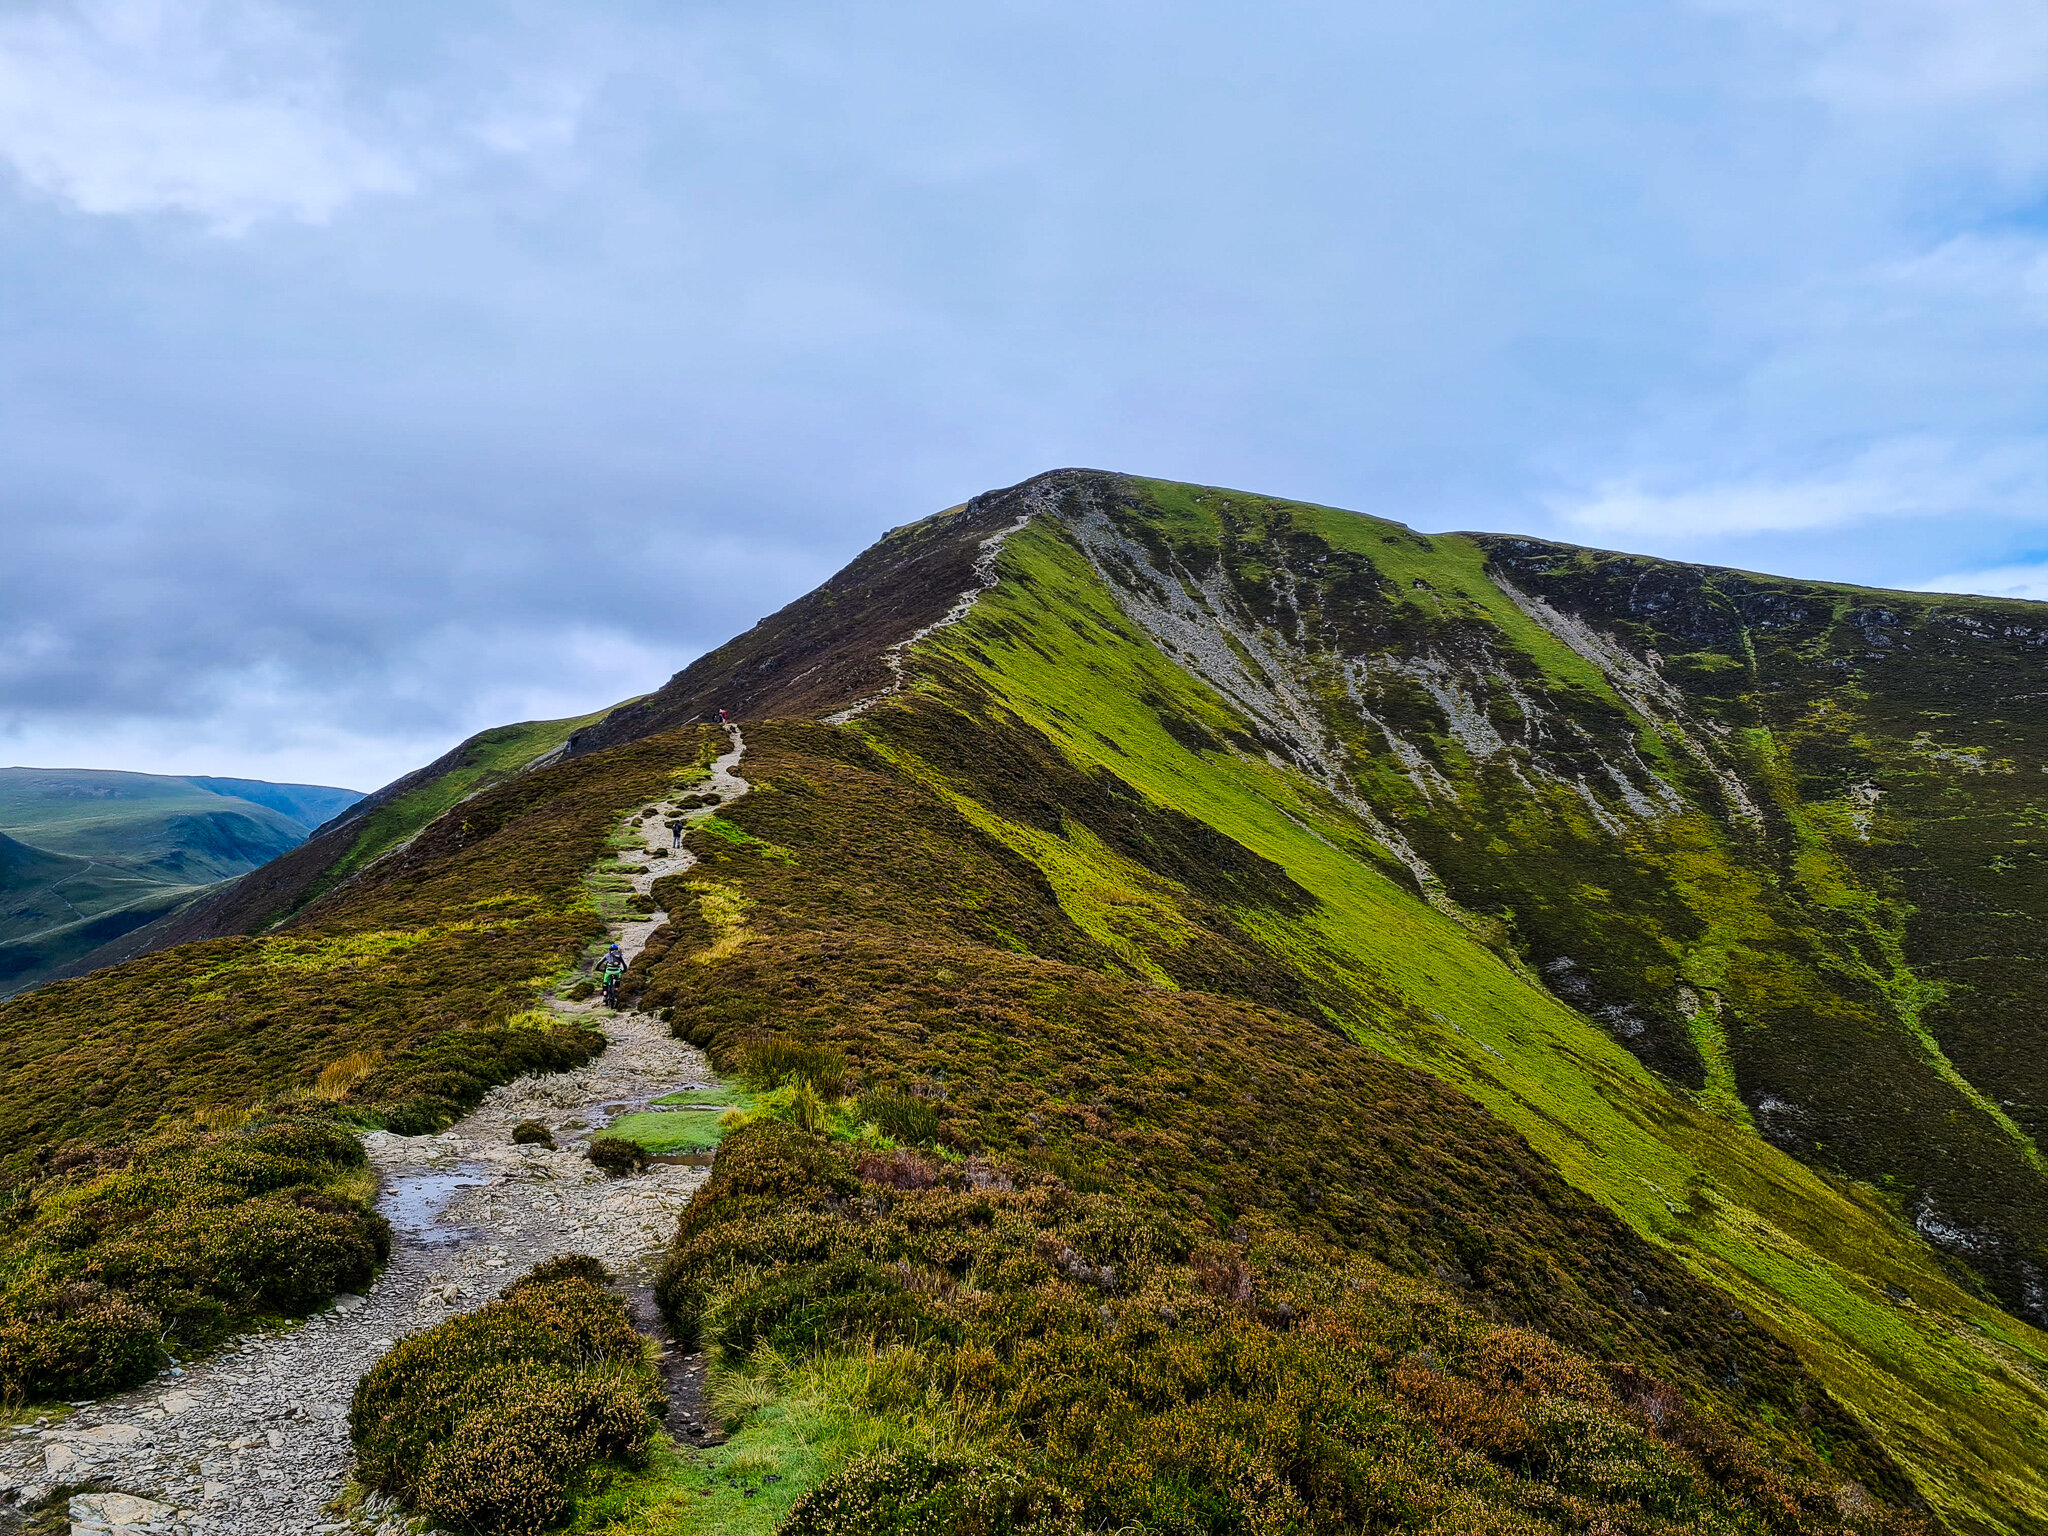 Ascending up to Grisedale pike